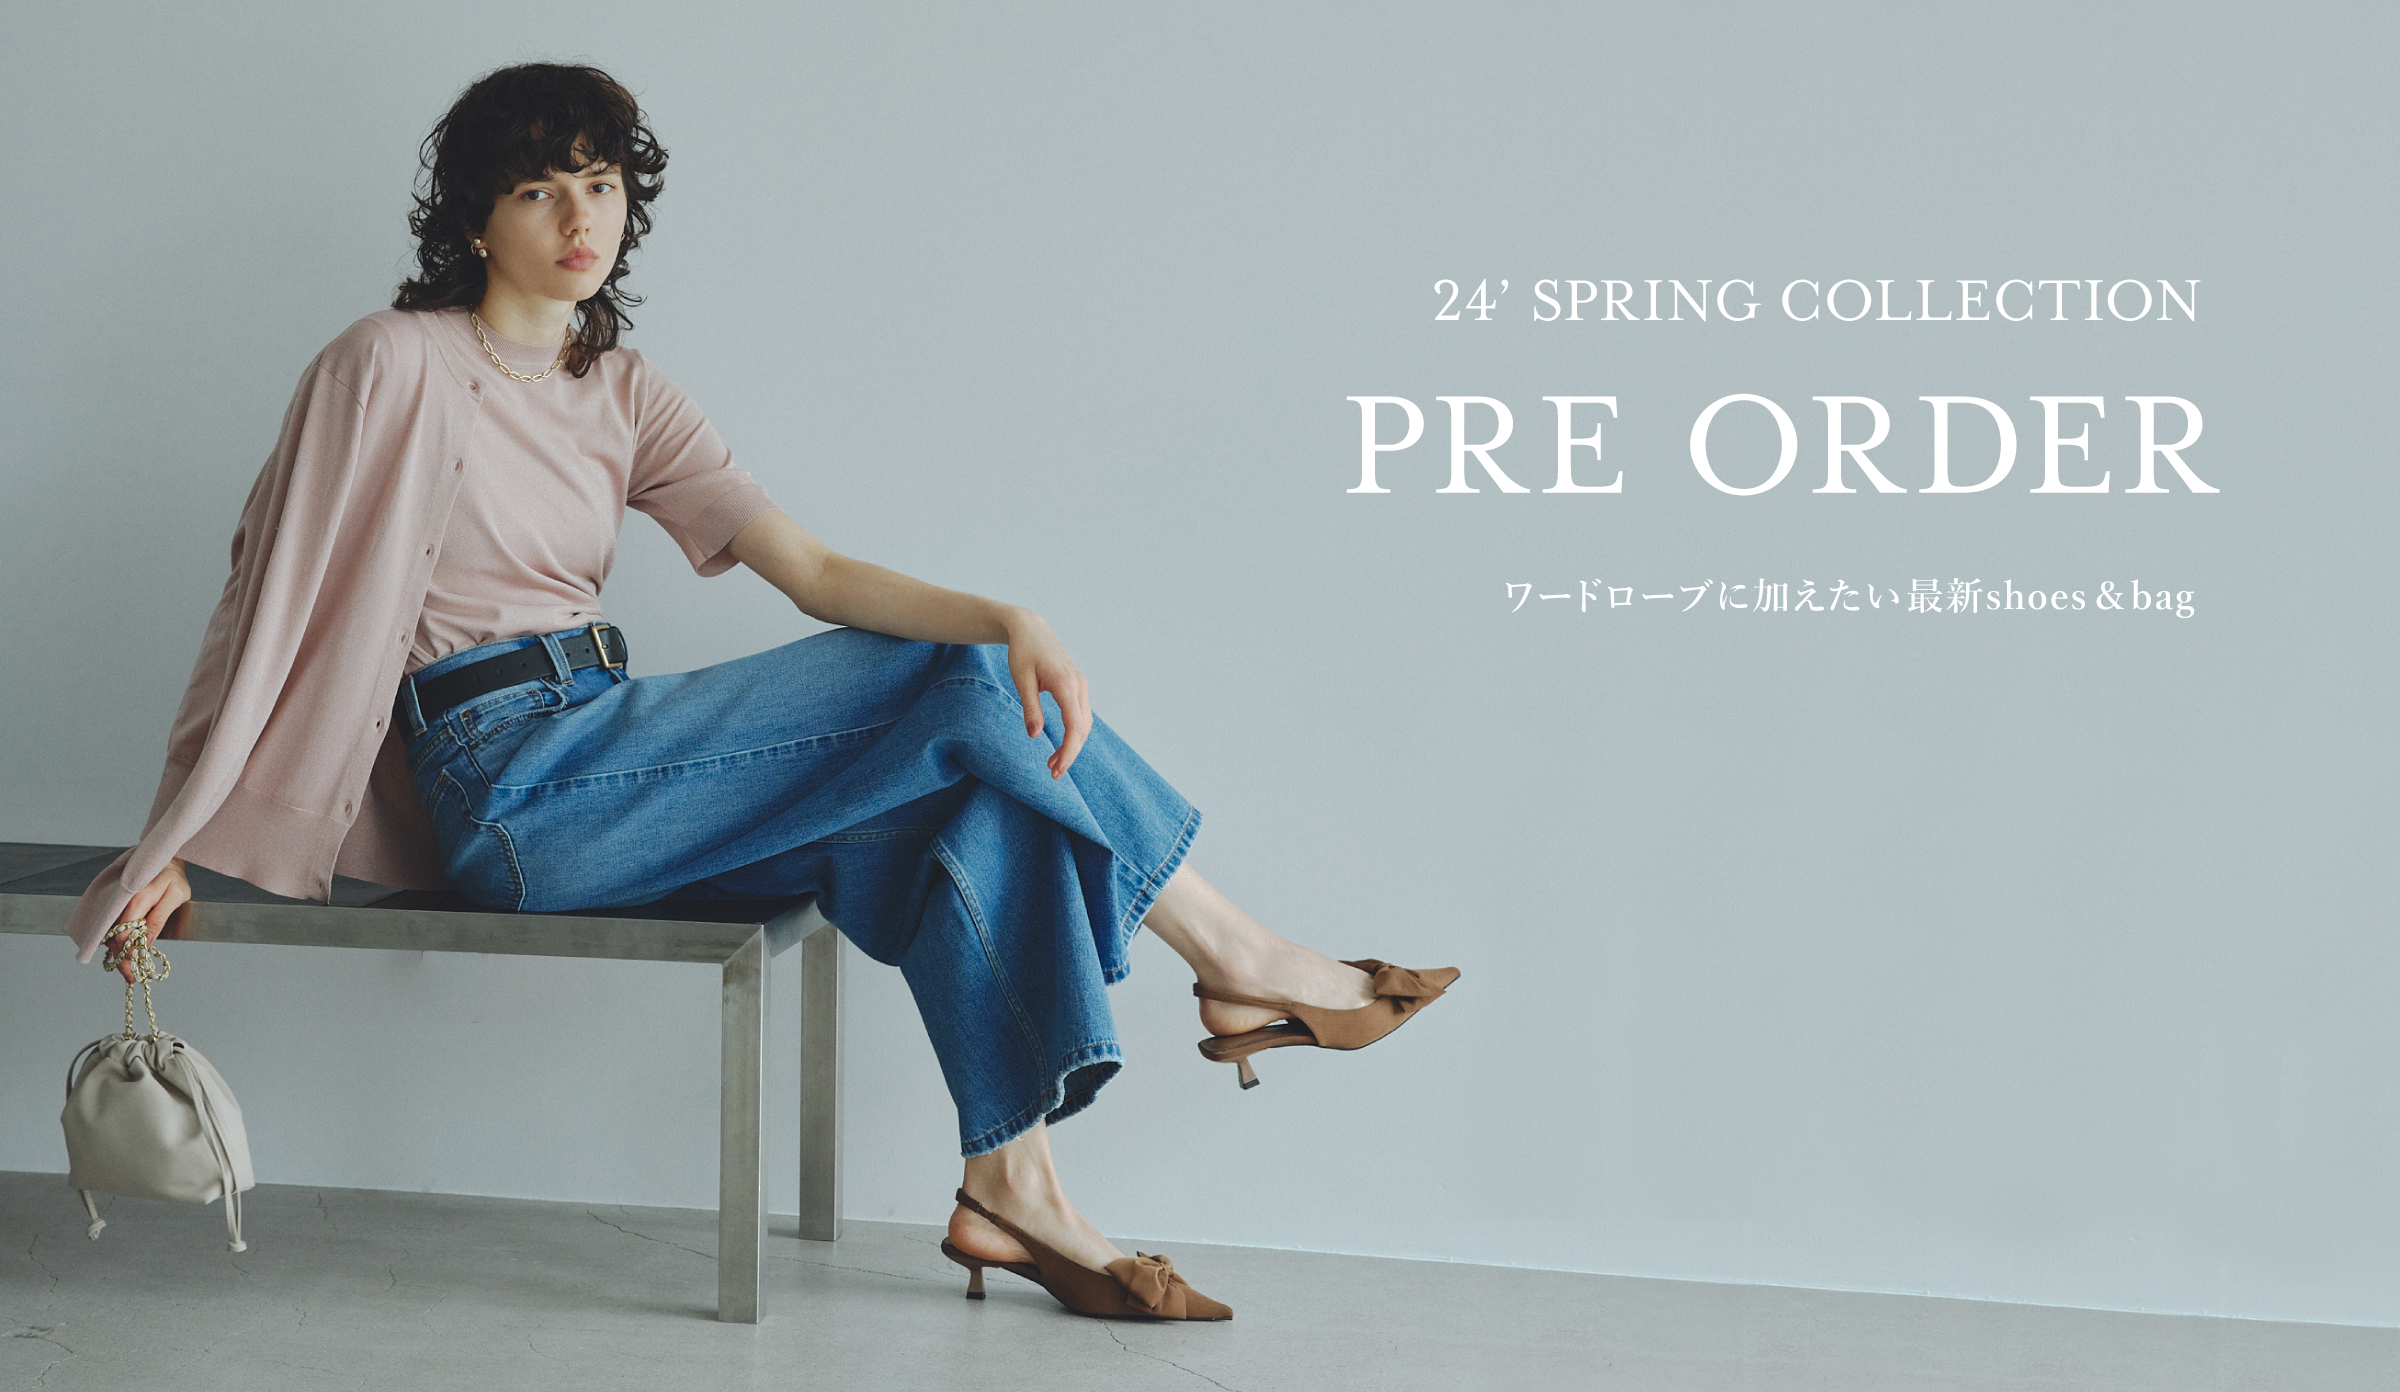 24' SPRING COLLECTION PRE ORDER ワードローブに加えたい最新shoes&bag